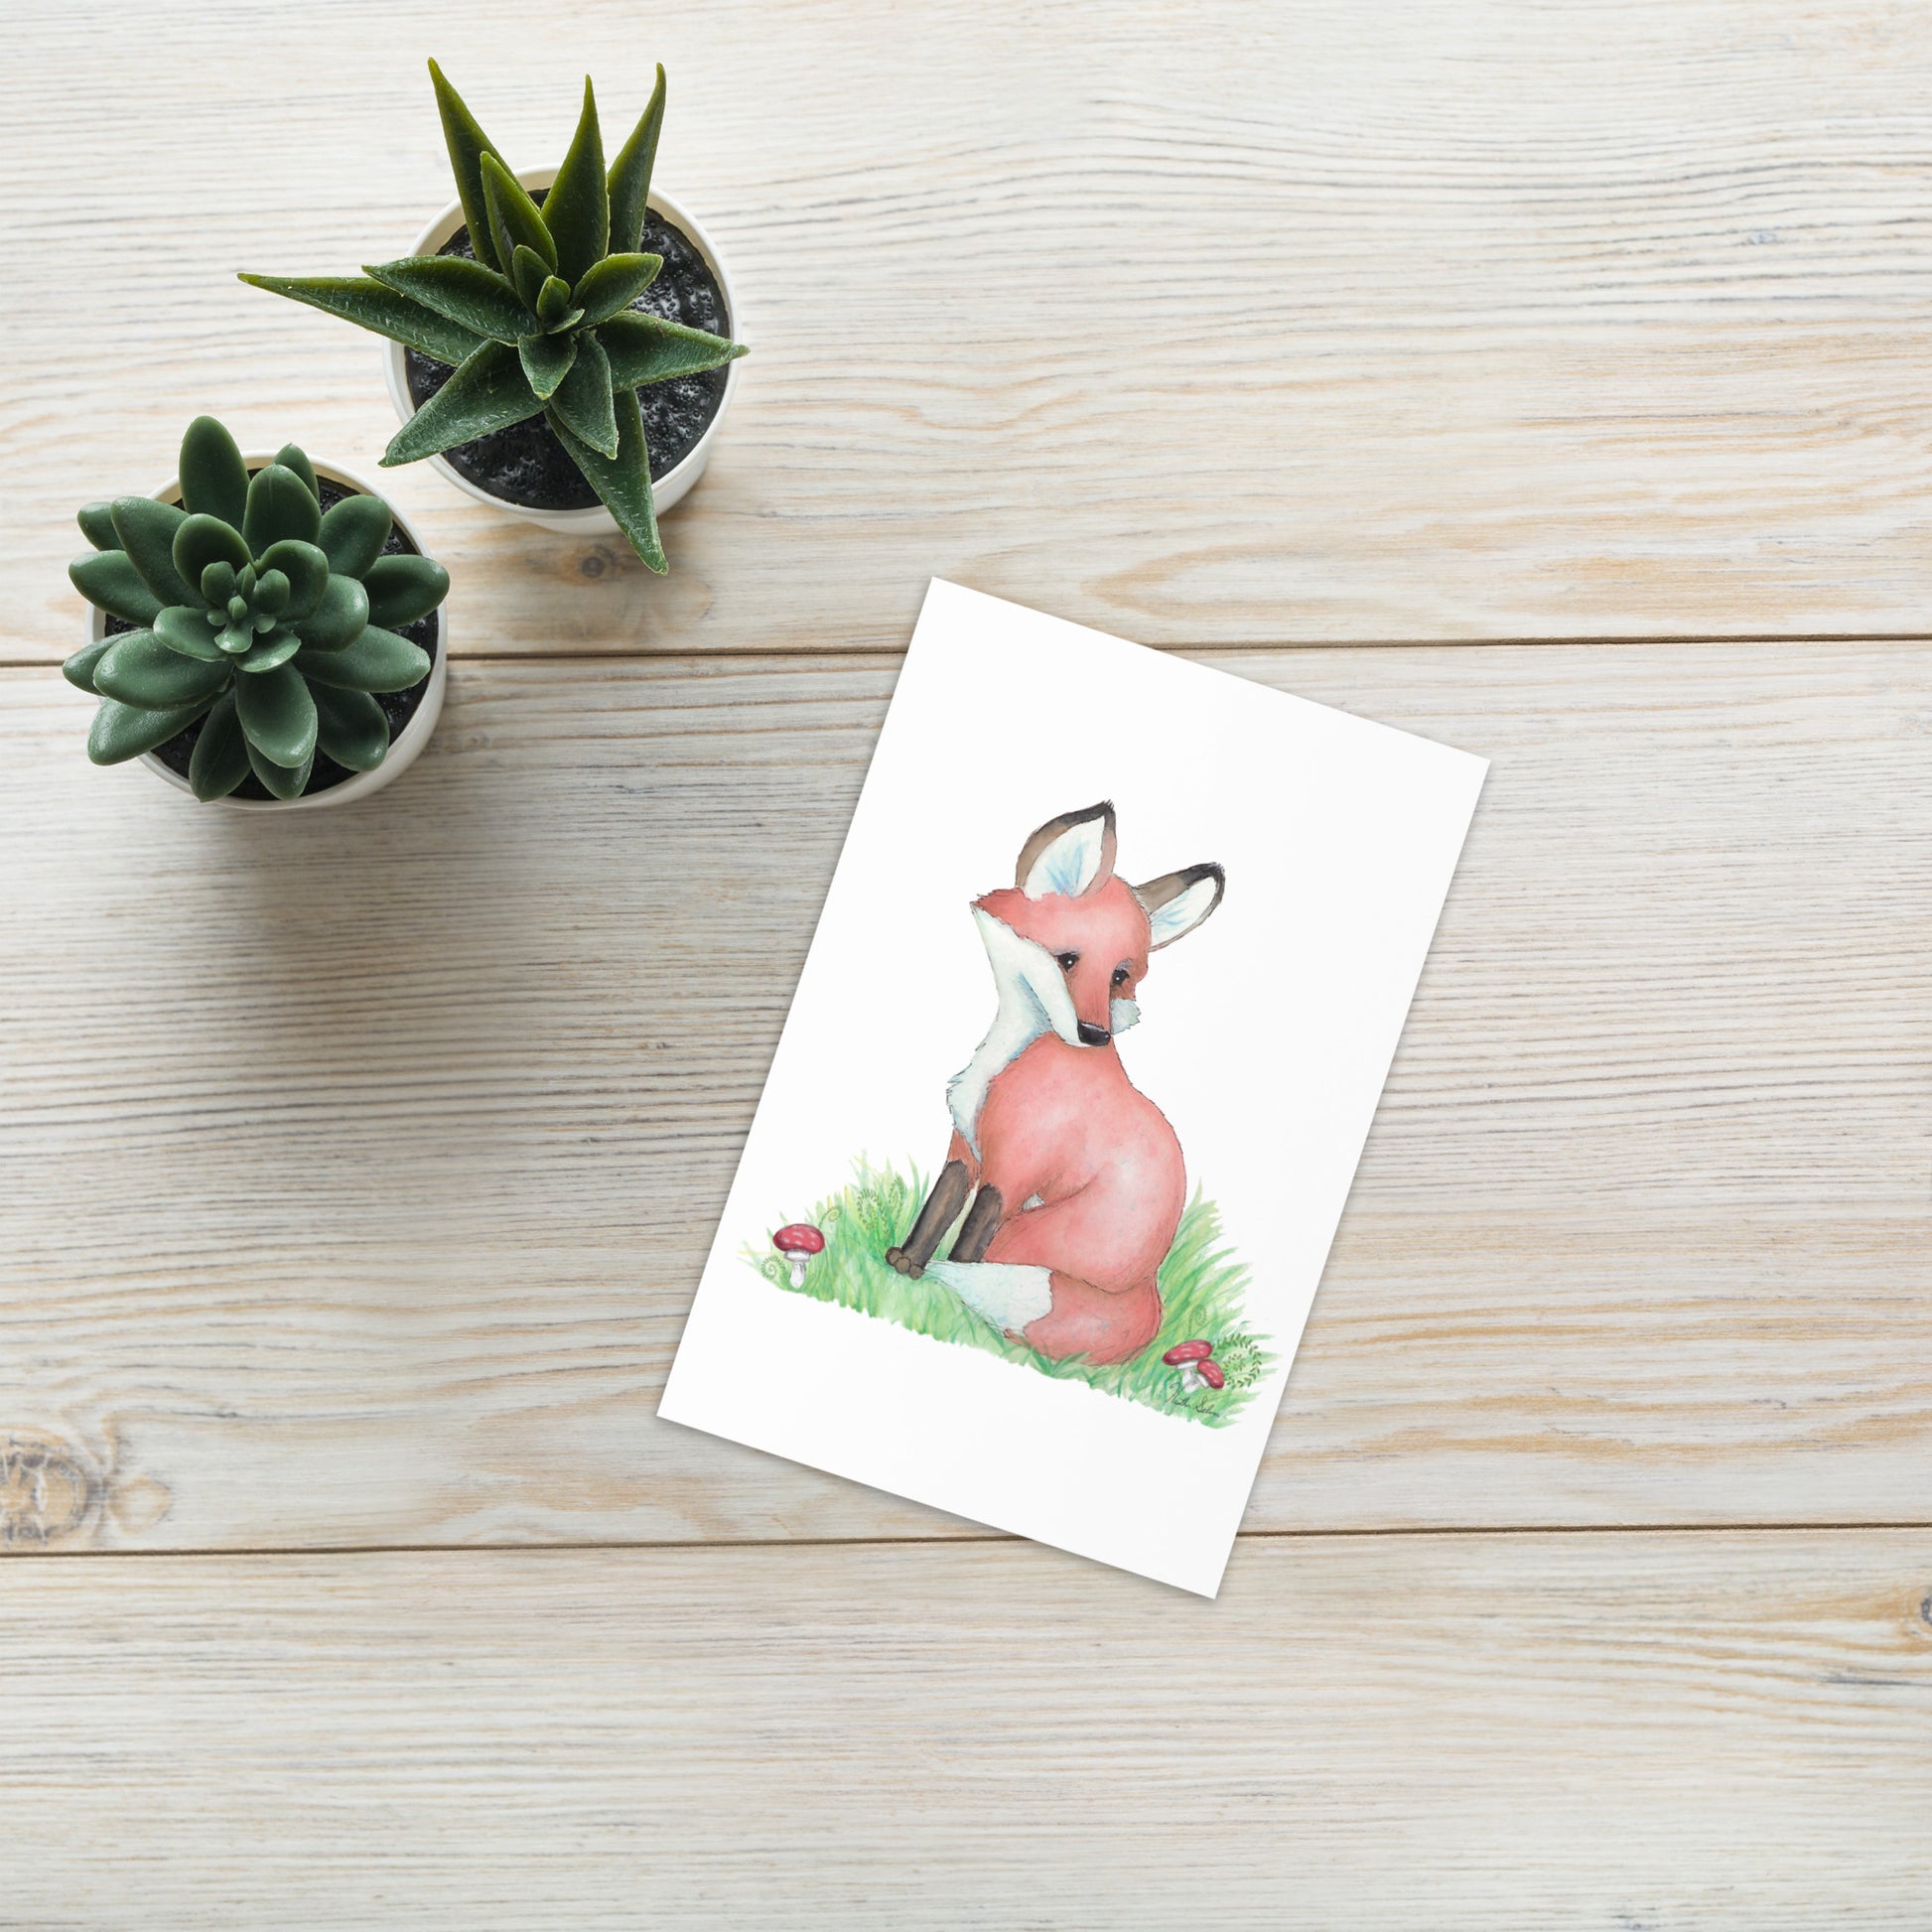 4 by 6 inch forest fox greeting card. Front has watercolor print of a fox in the grass by mushrooms and ferns. Inside is blank. Comes with a white envelope. Made of durable paperboard with vibrant printing. Shown on tabletop by succulents.